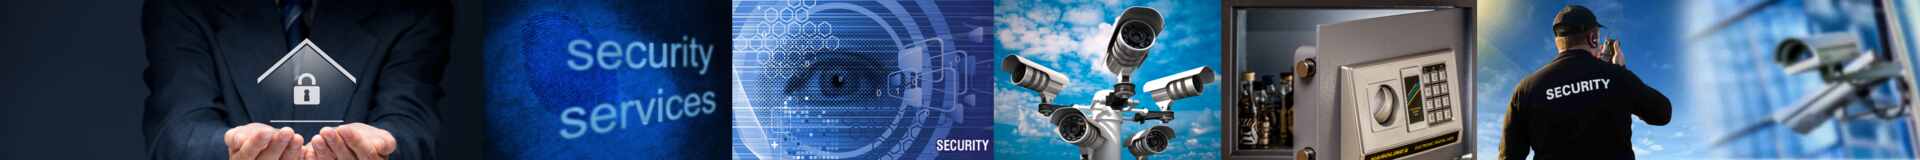 Global Security Services bids and RFP from Japan